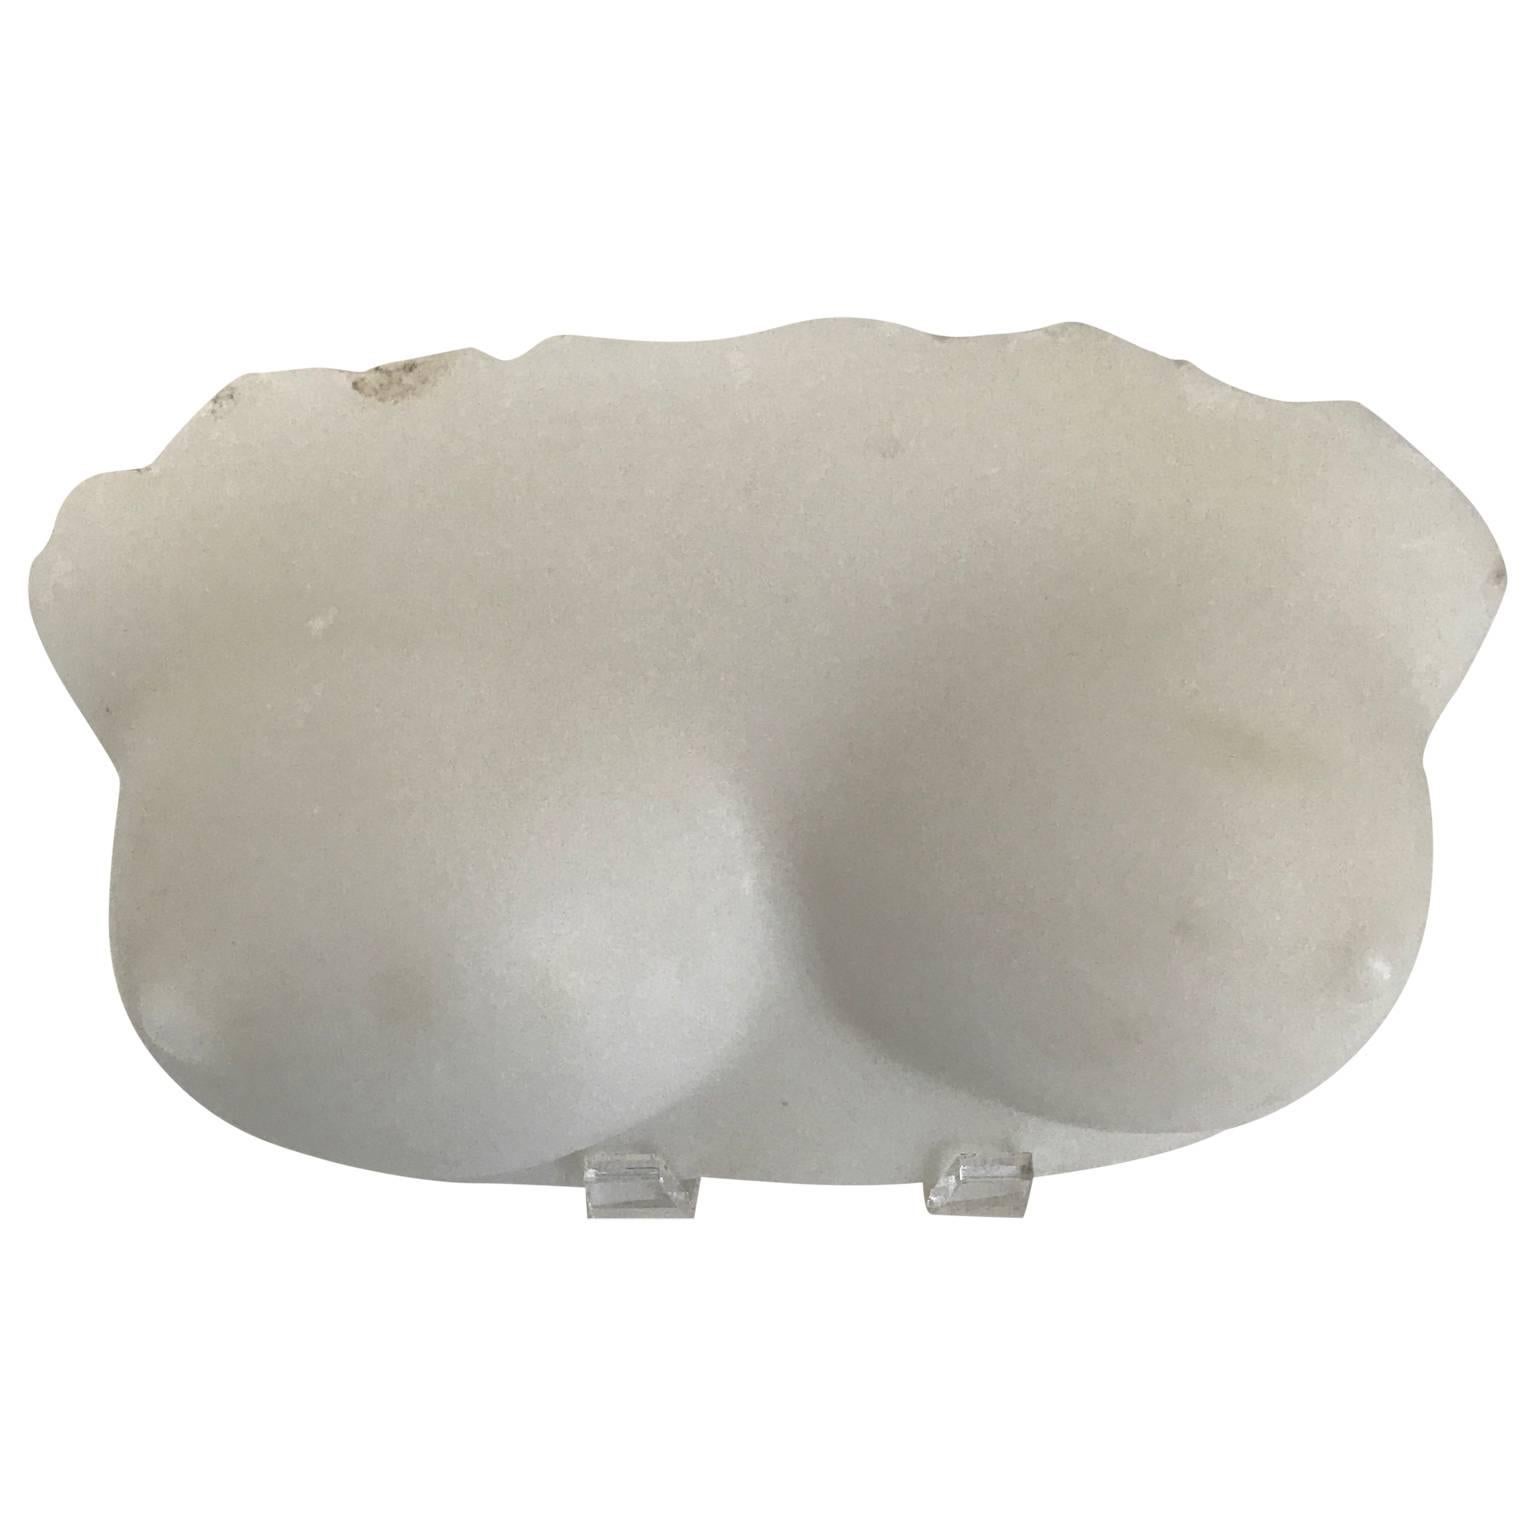 Marble fragment sculpture of bosoms.